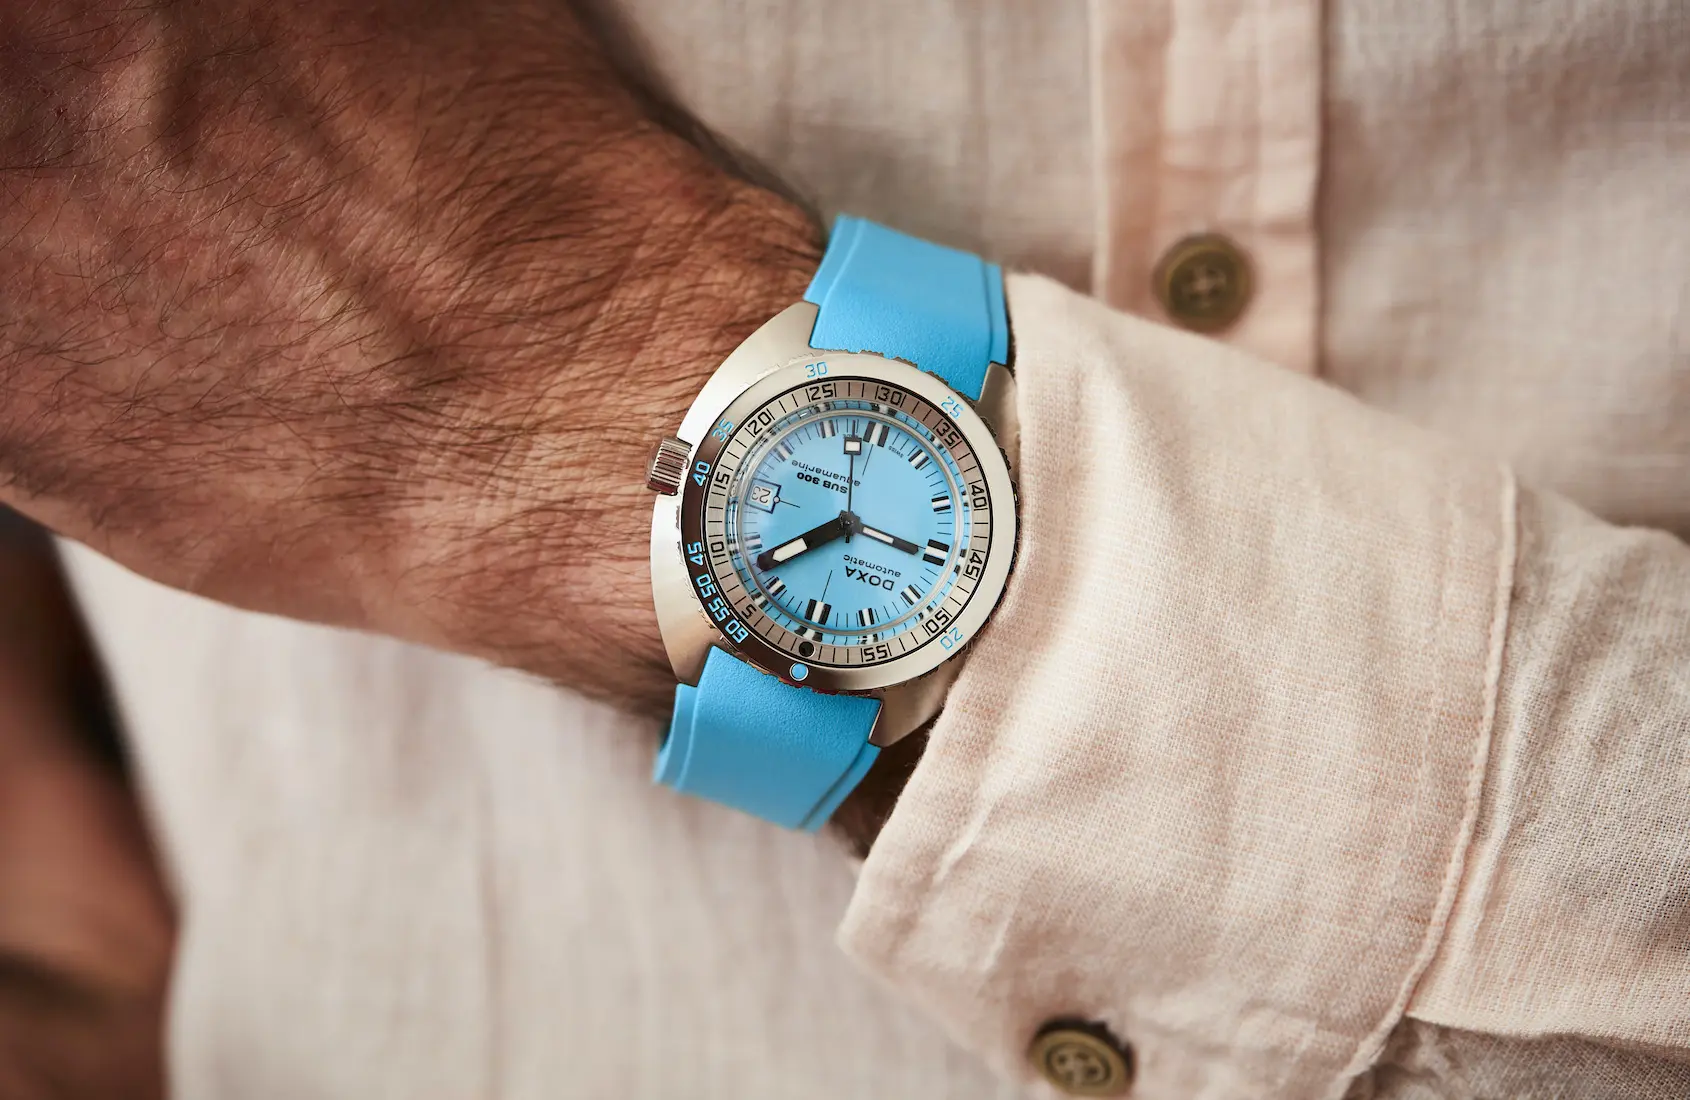 This $10 Watch is the COOLEST Ever Made